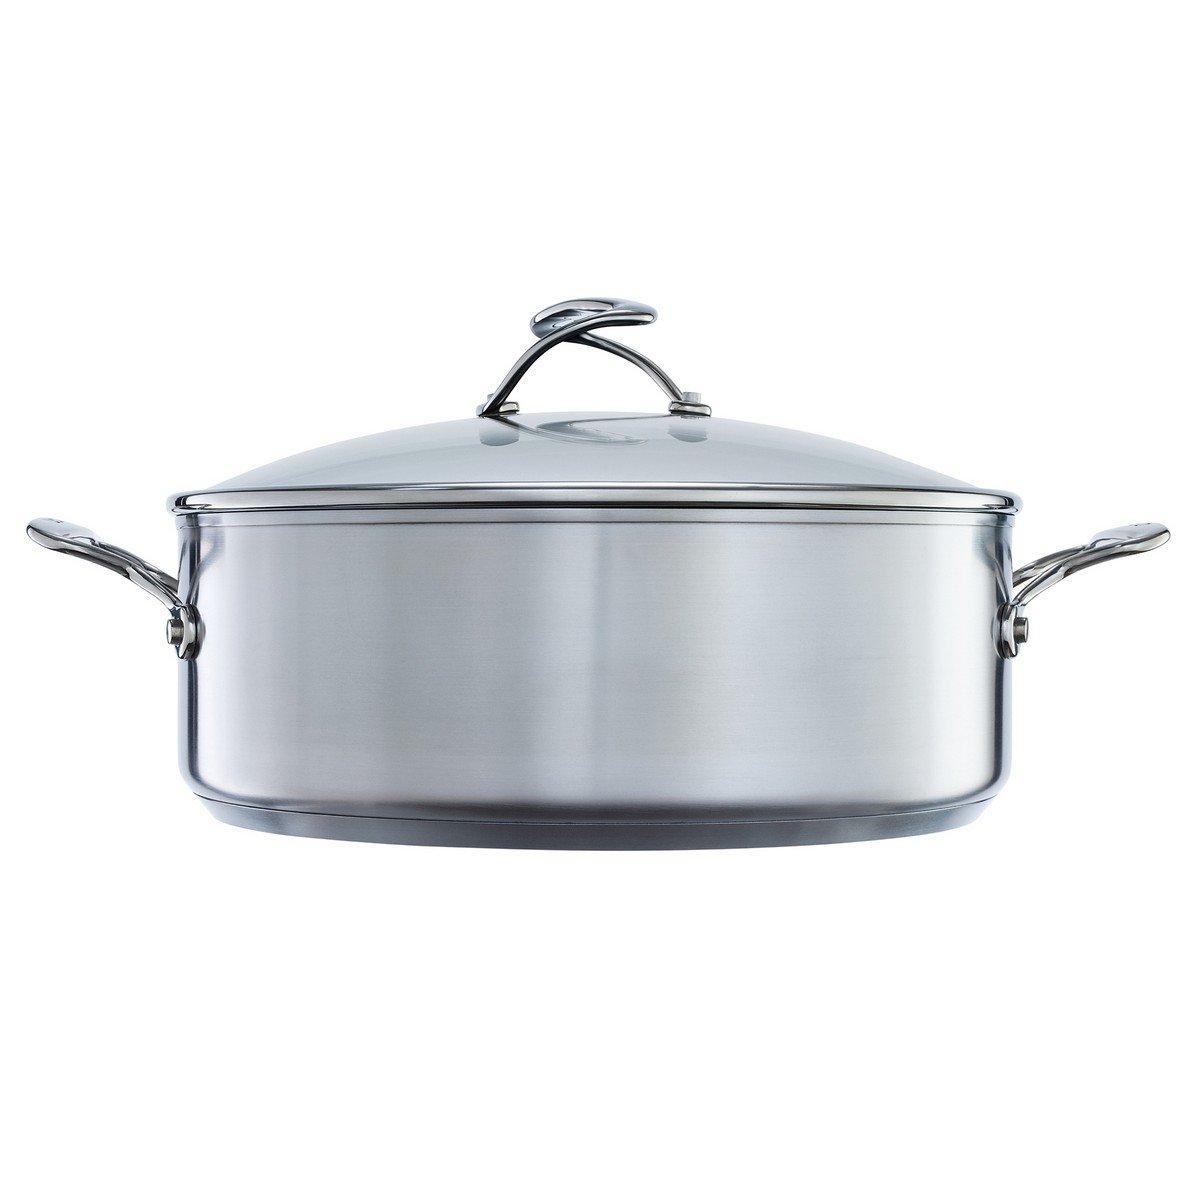 Stockpot in Stainless Steel Dishwasher Safe Non Stick Cookware - 30 cm